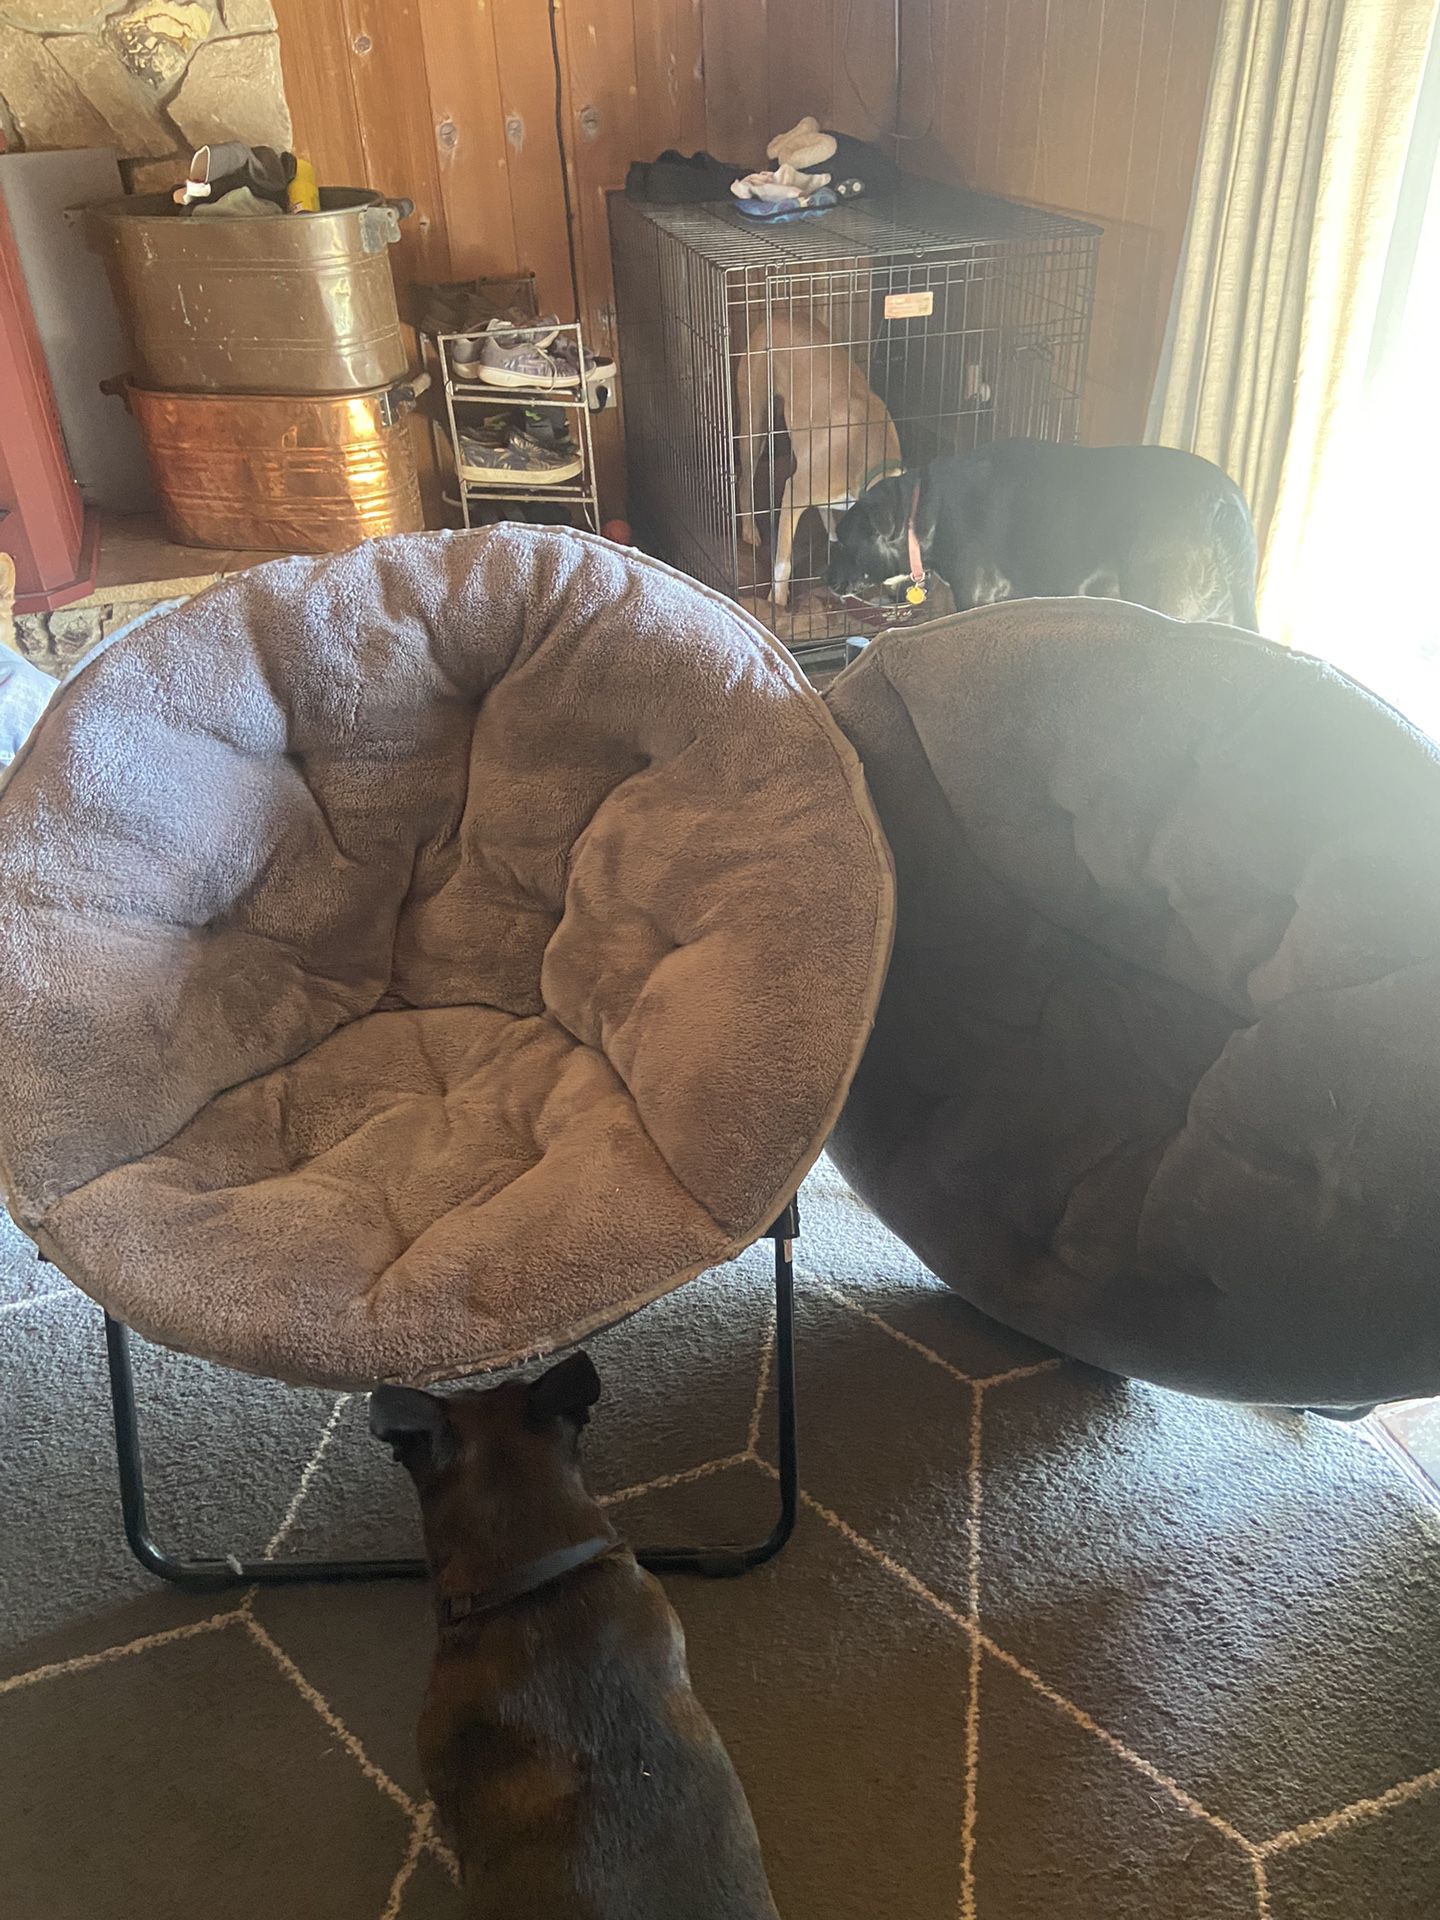 Plush Saucer Chair Used But In Great Condition 20$  Only One Available 